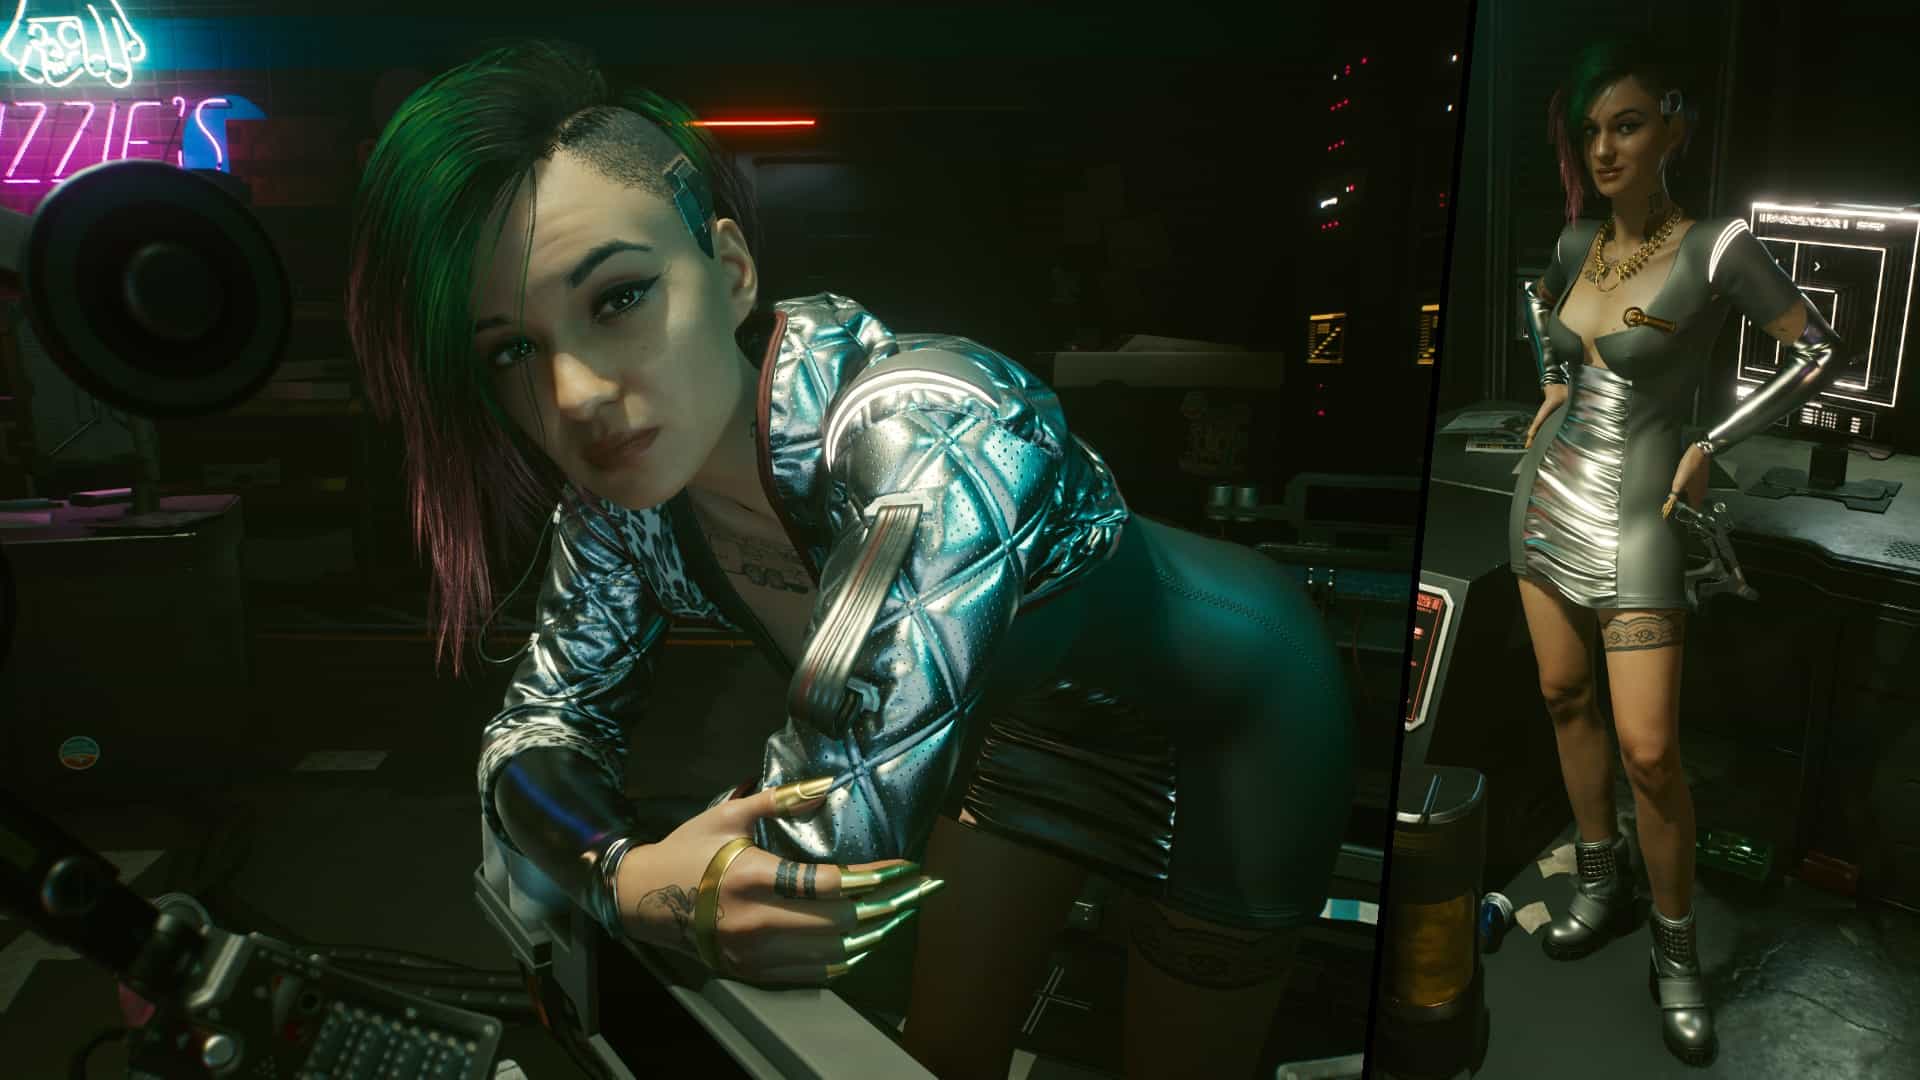 Best clothing mods for Cyberpunk 2077